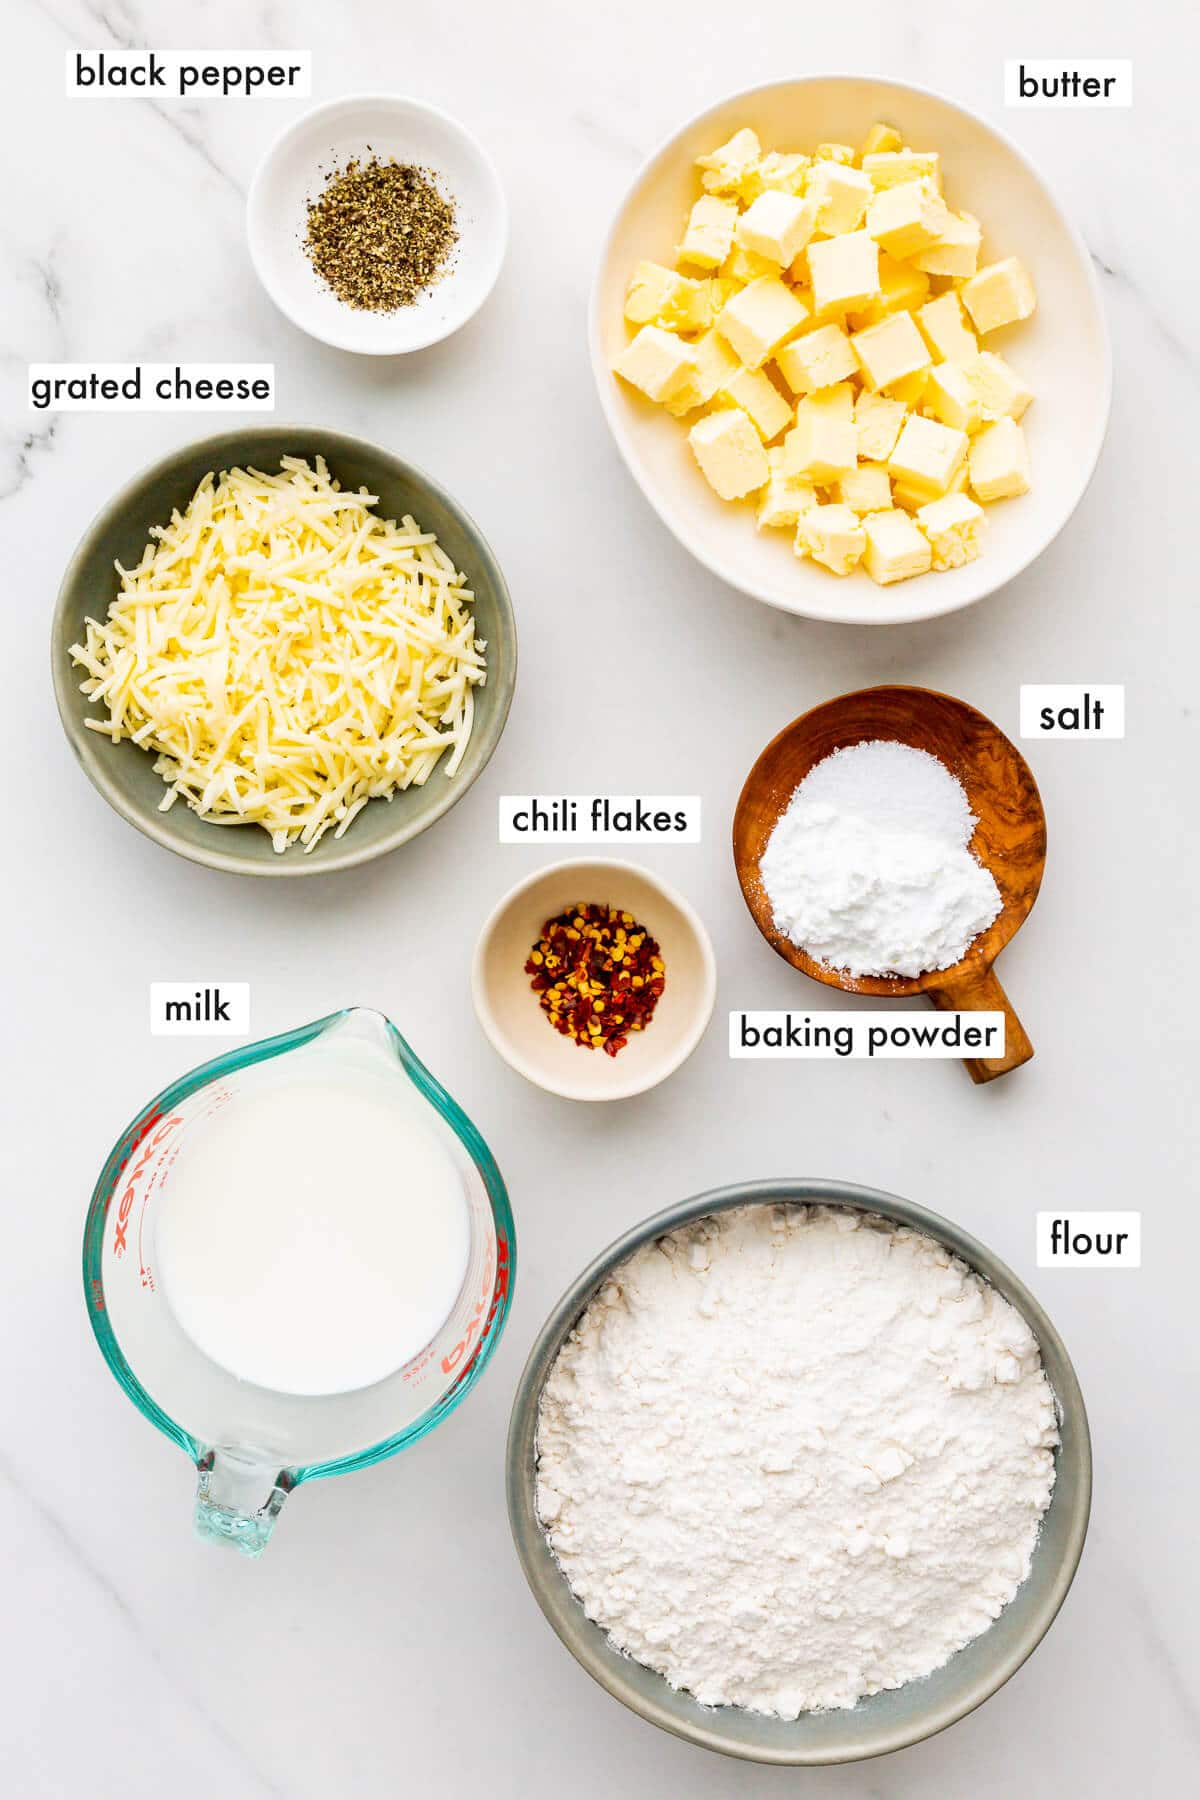 Ingredients to make scones with cheese, measured and ready to be mixed.